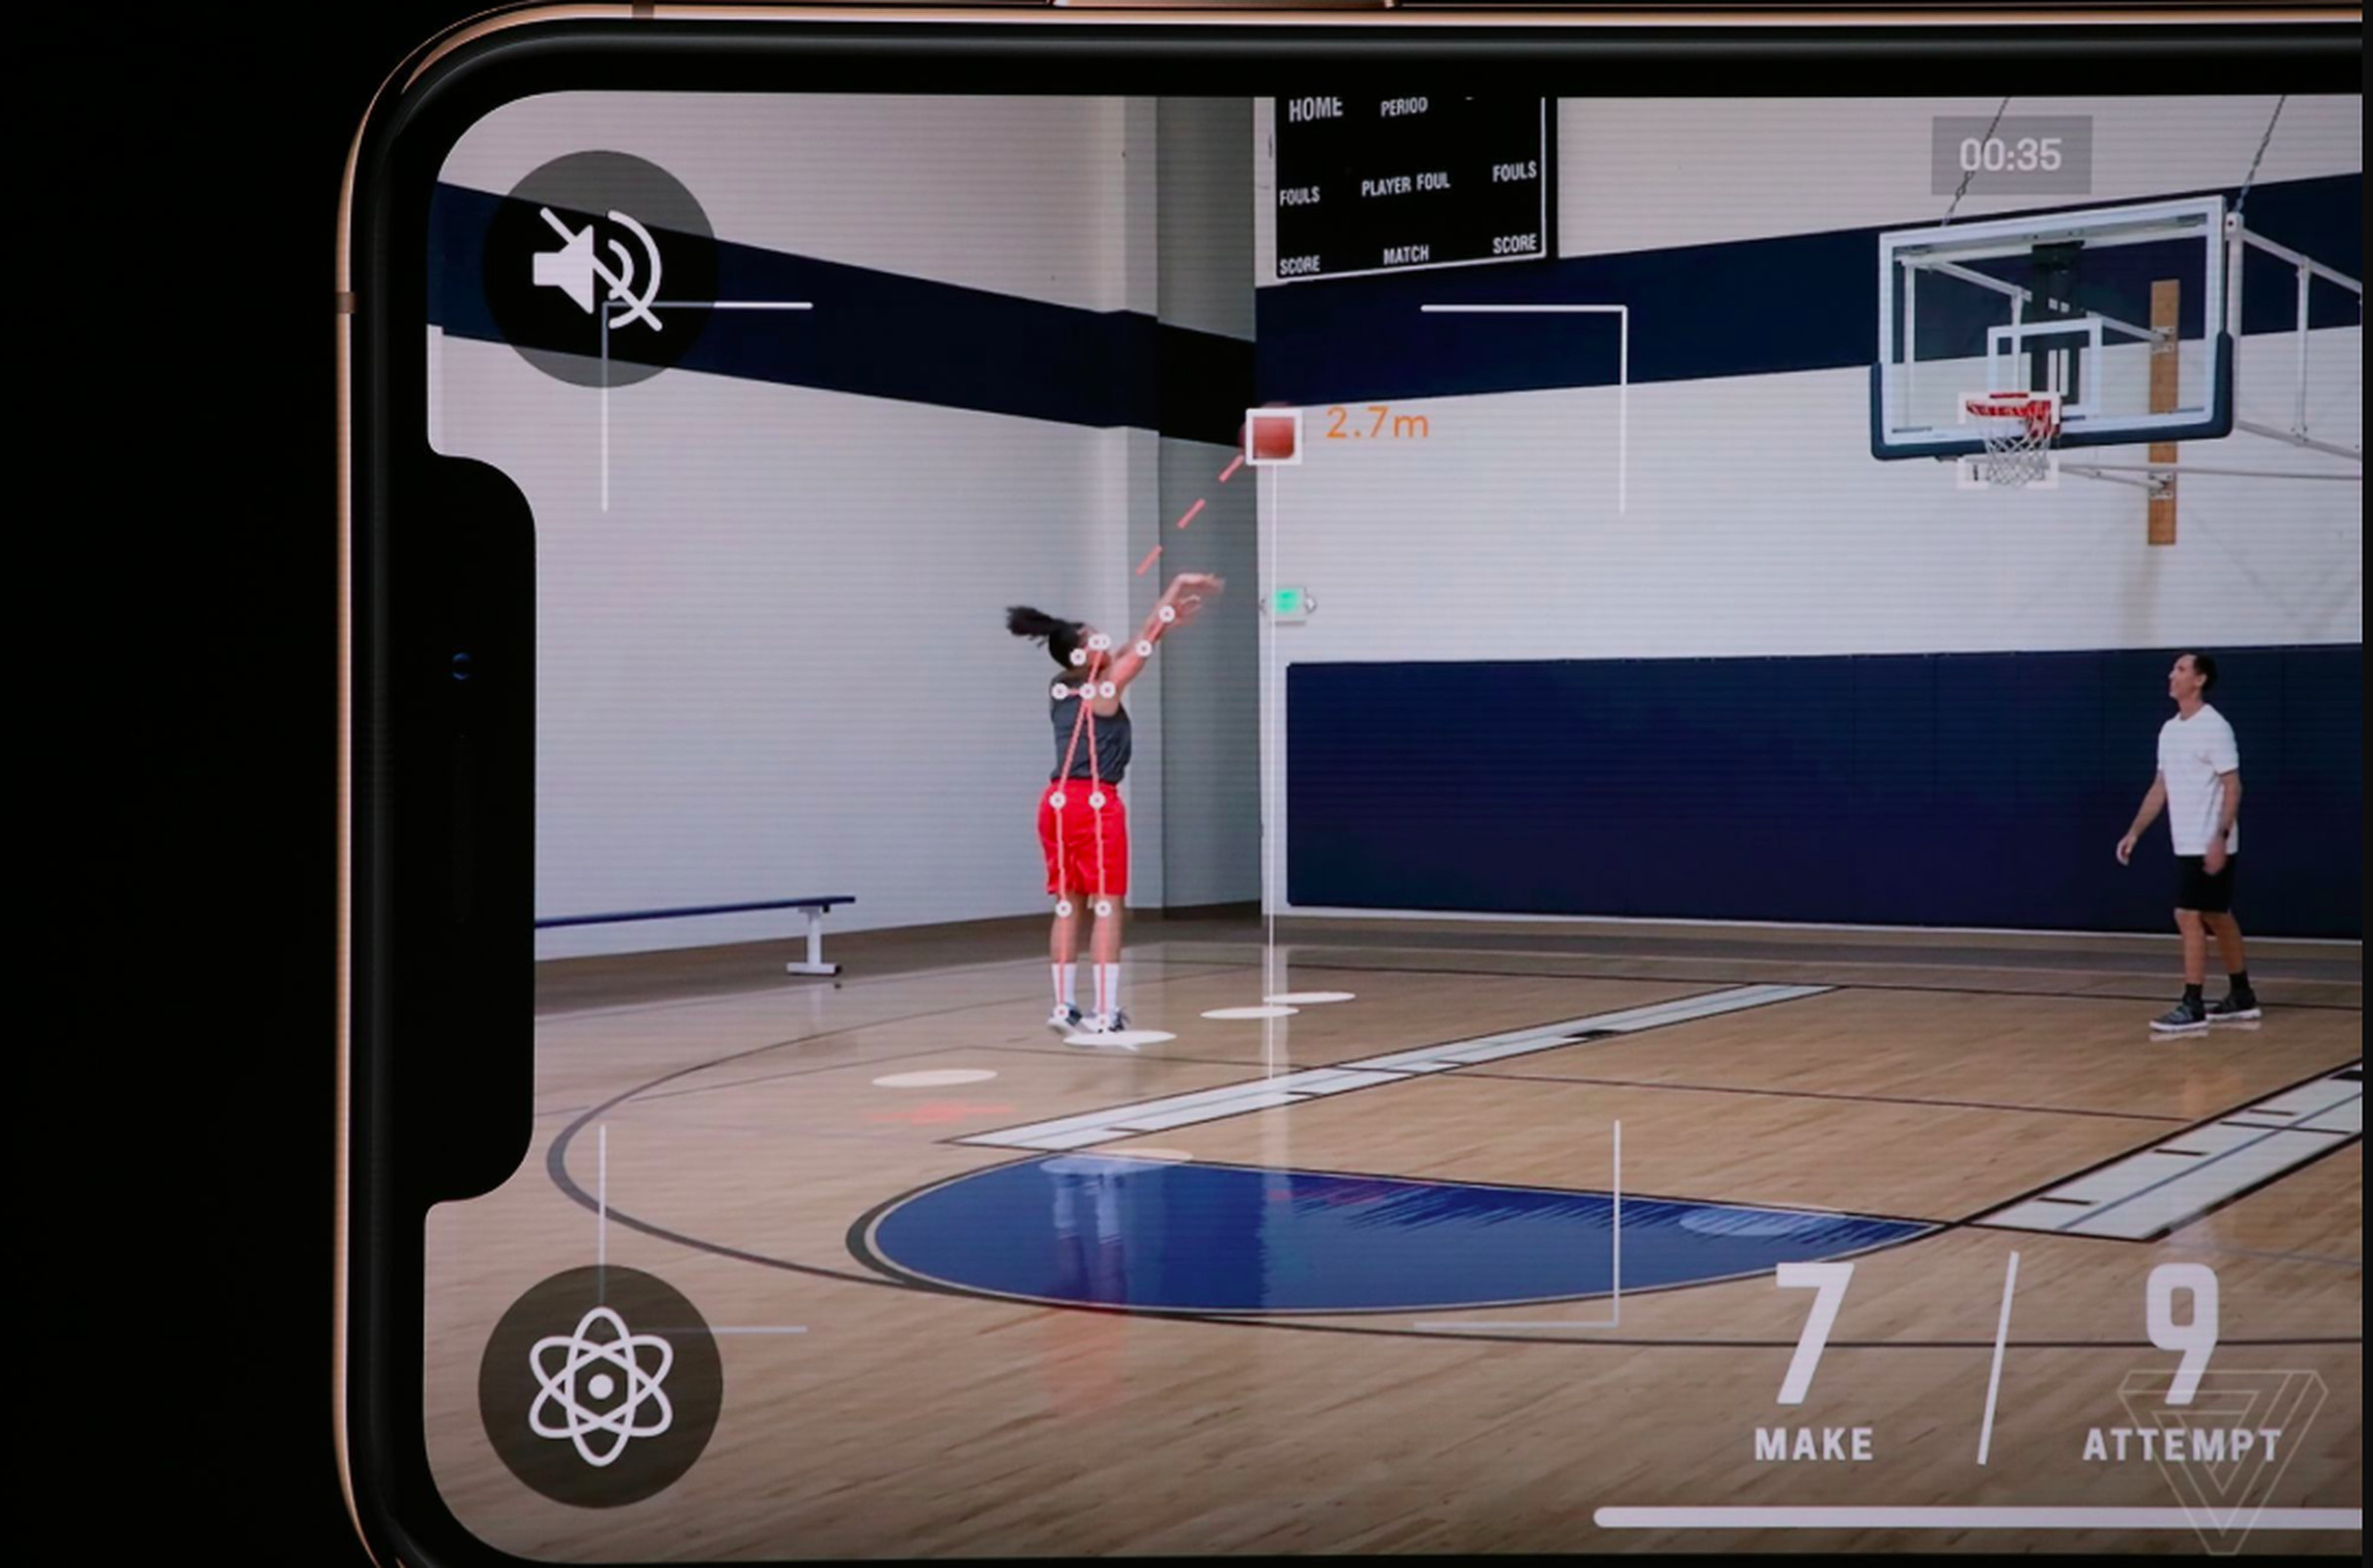 Faster processing with the Neural Engine will enable new app functionality, like Homecourt, which analyzes your basketball game in real time. 